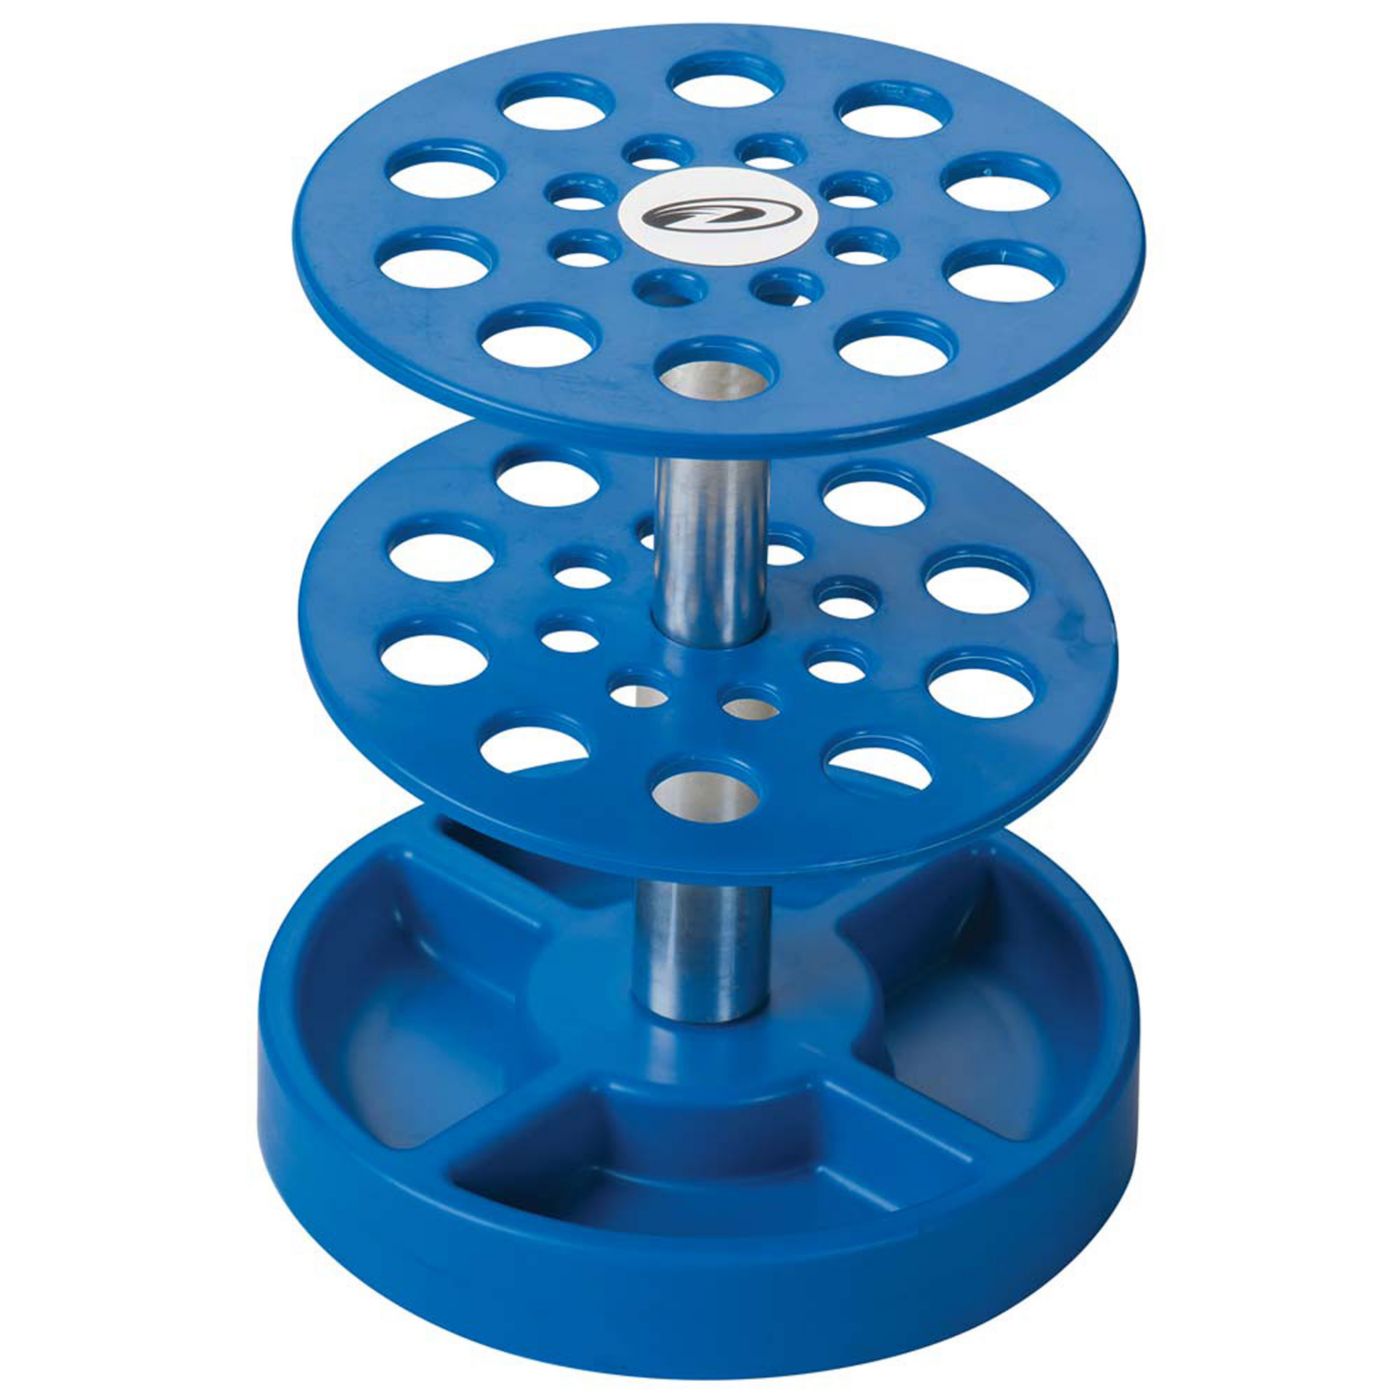 Team Losi Pit Tech Deluxe Tool Stand, Blue - DTXC2390